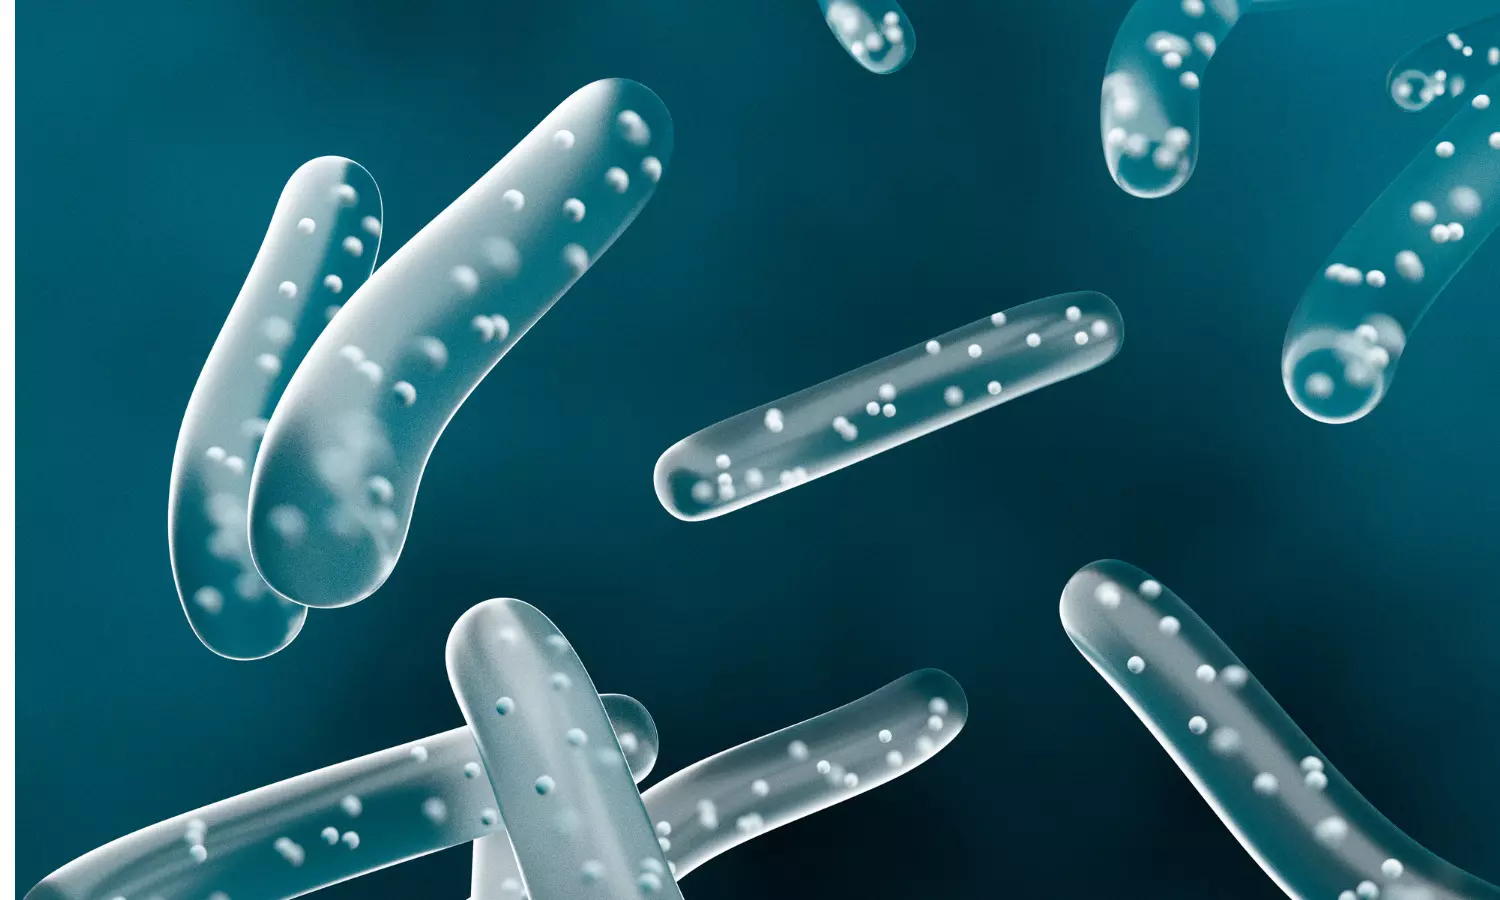 Probiotics tied to increased mortality among ICU patients: A boon or a hazard?